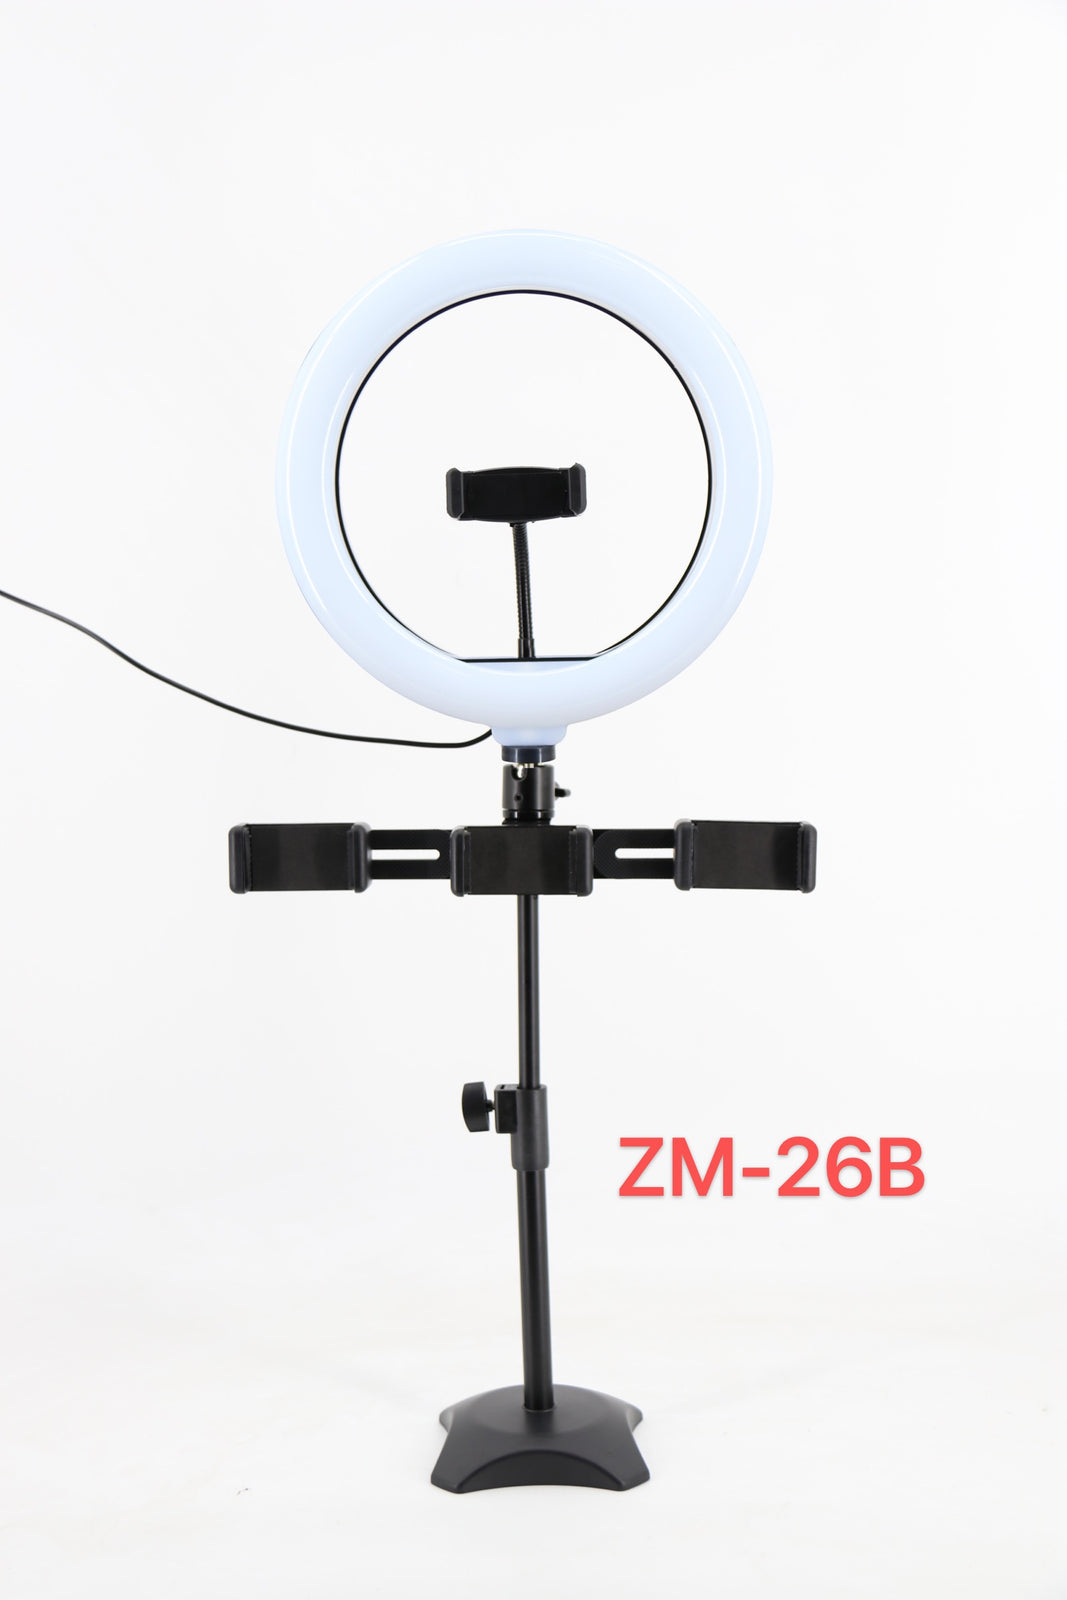 ZM-26B Phone Stand with lamp